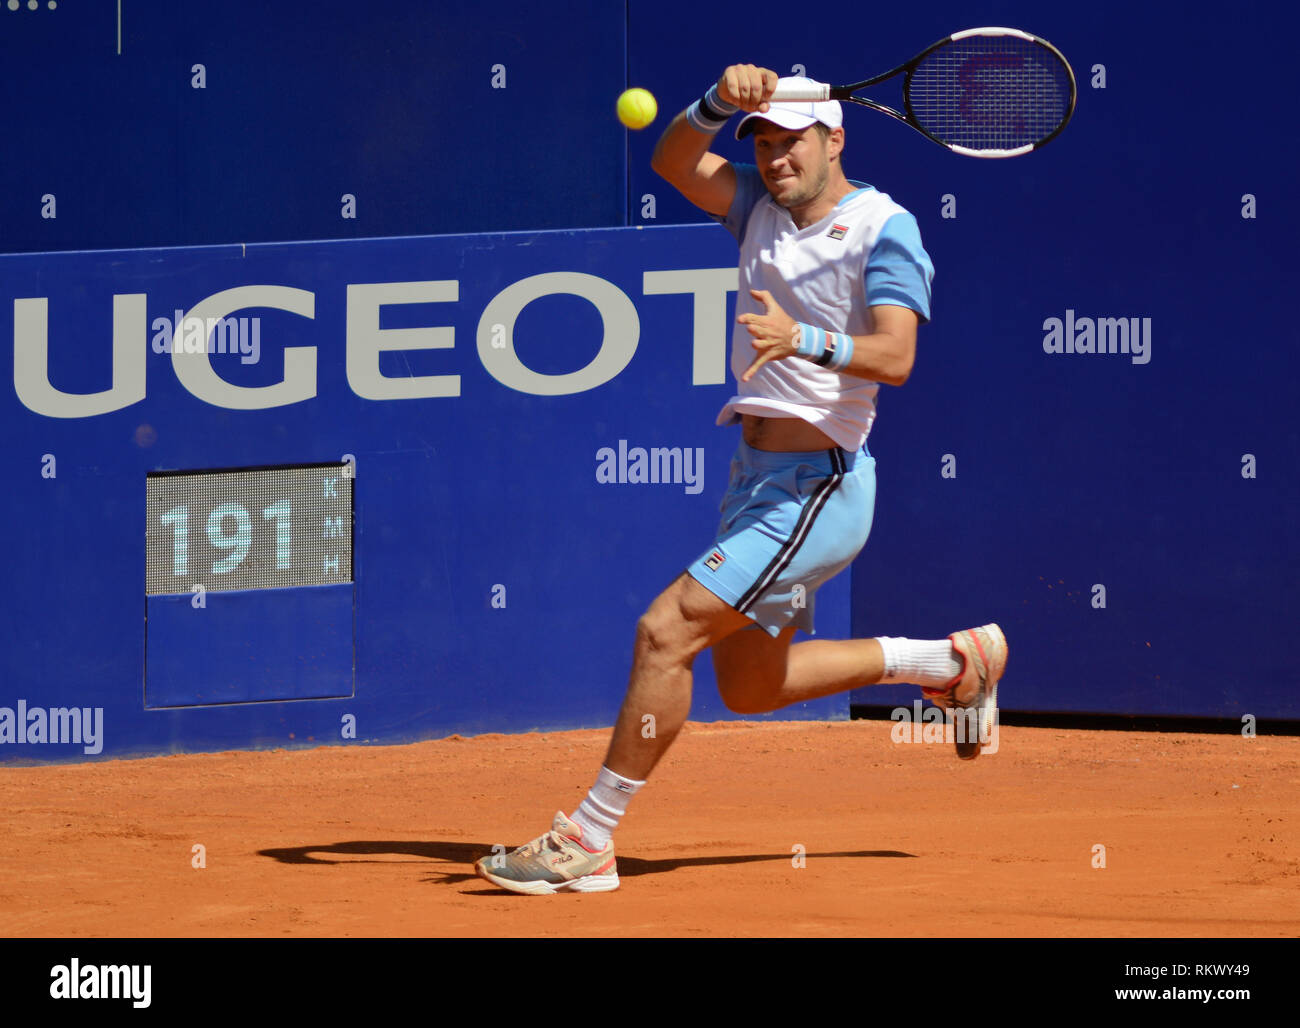 Buenos Aires, Argentina. 12th Feb 2019. Dusan Lajovic (Serbia) lost against Leonardo Mayer (Argentina) in the Argentina Open, an ATP 250 tennis tournament Credit: Mariano Garcia/Alamy Live News Stock Photo